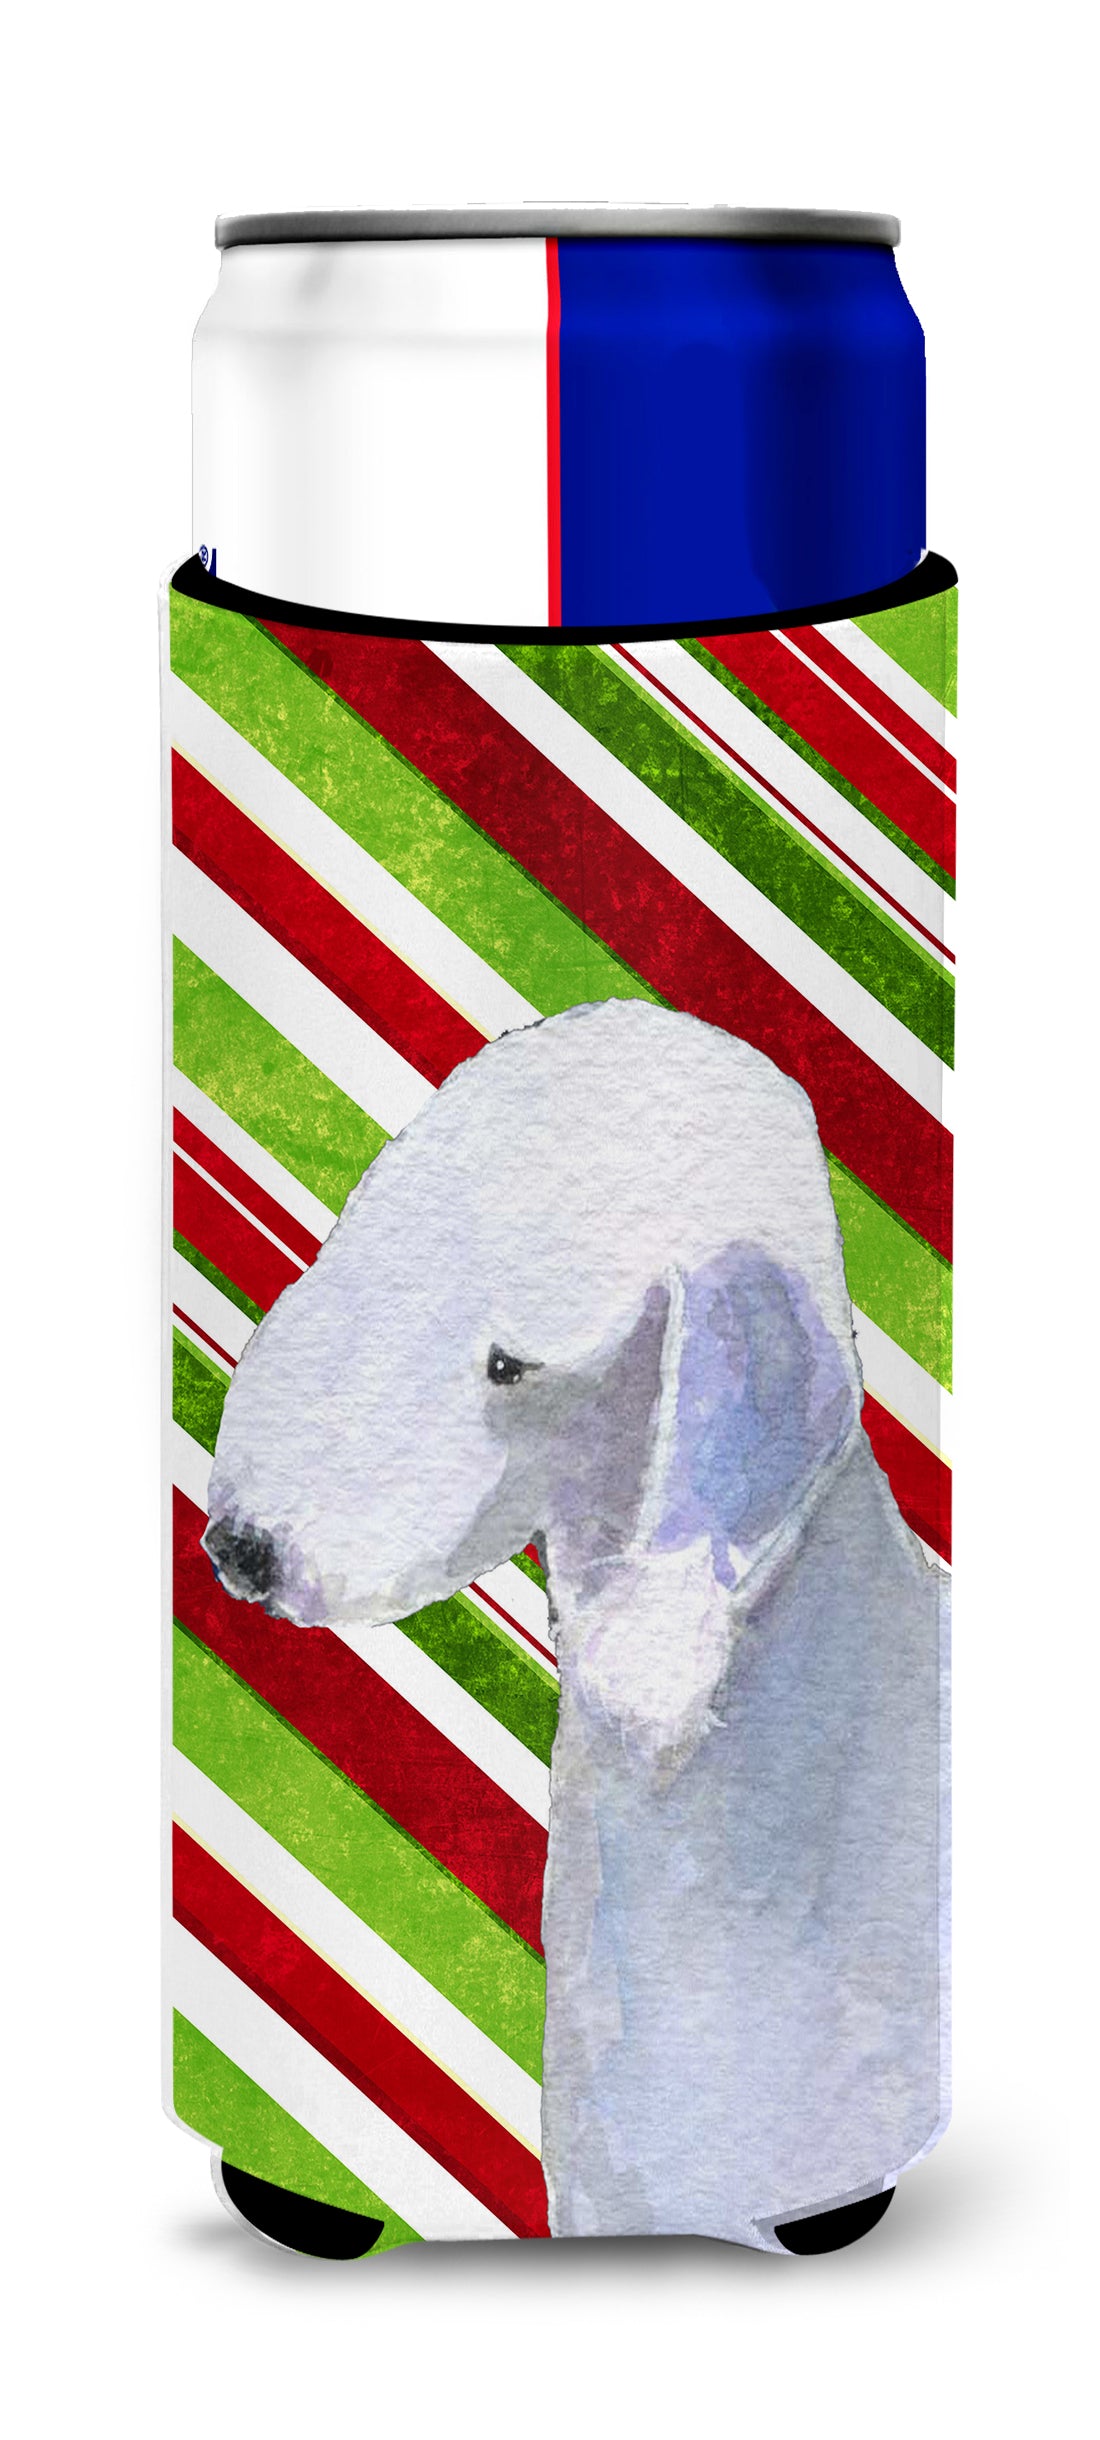 Bedlington Terrier Candy Cane Holiday Christmas Ultra Beverage Insulators for slim cans SS4552MUK.